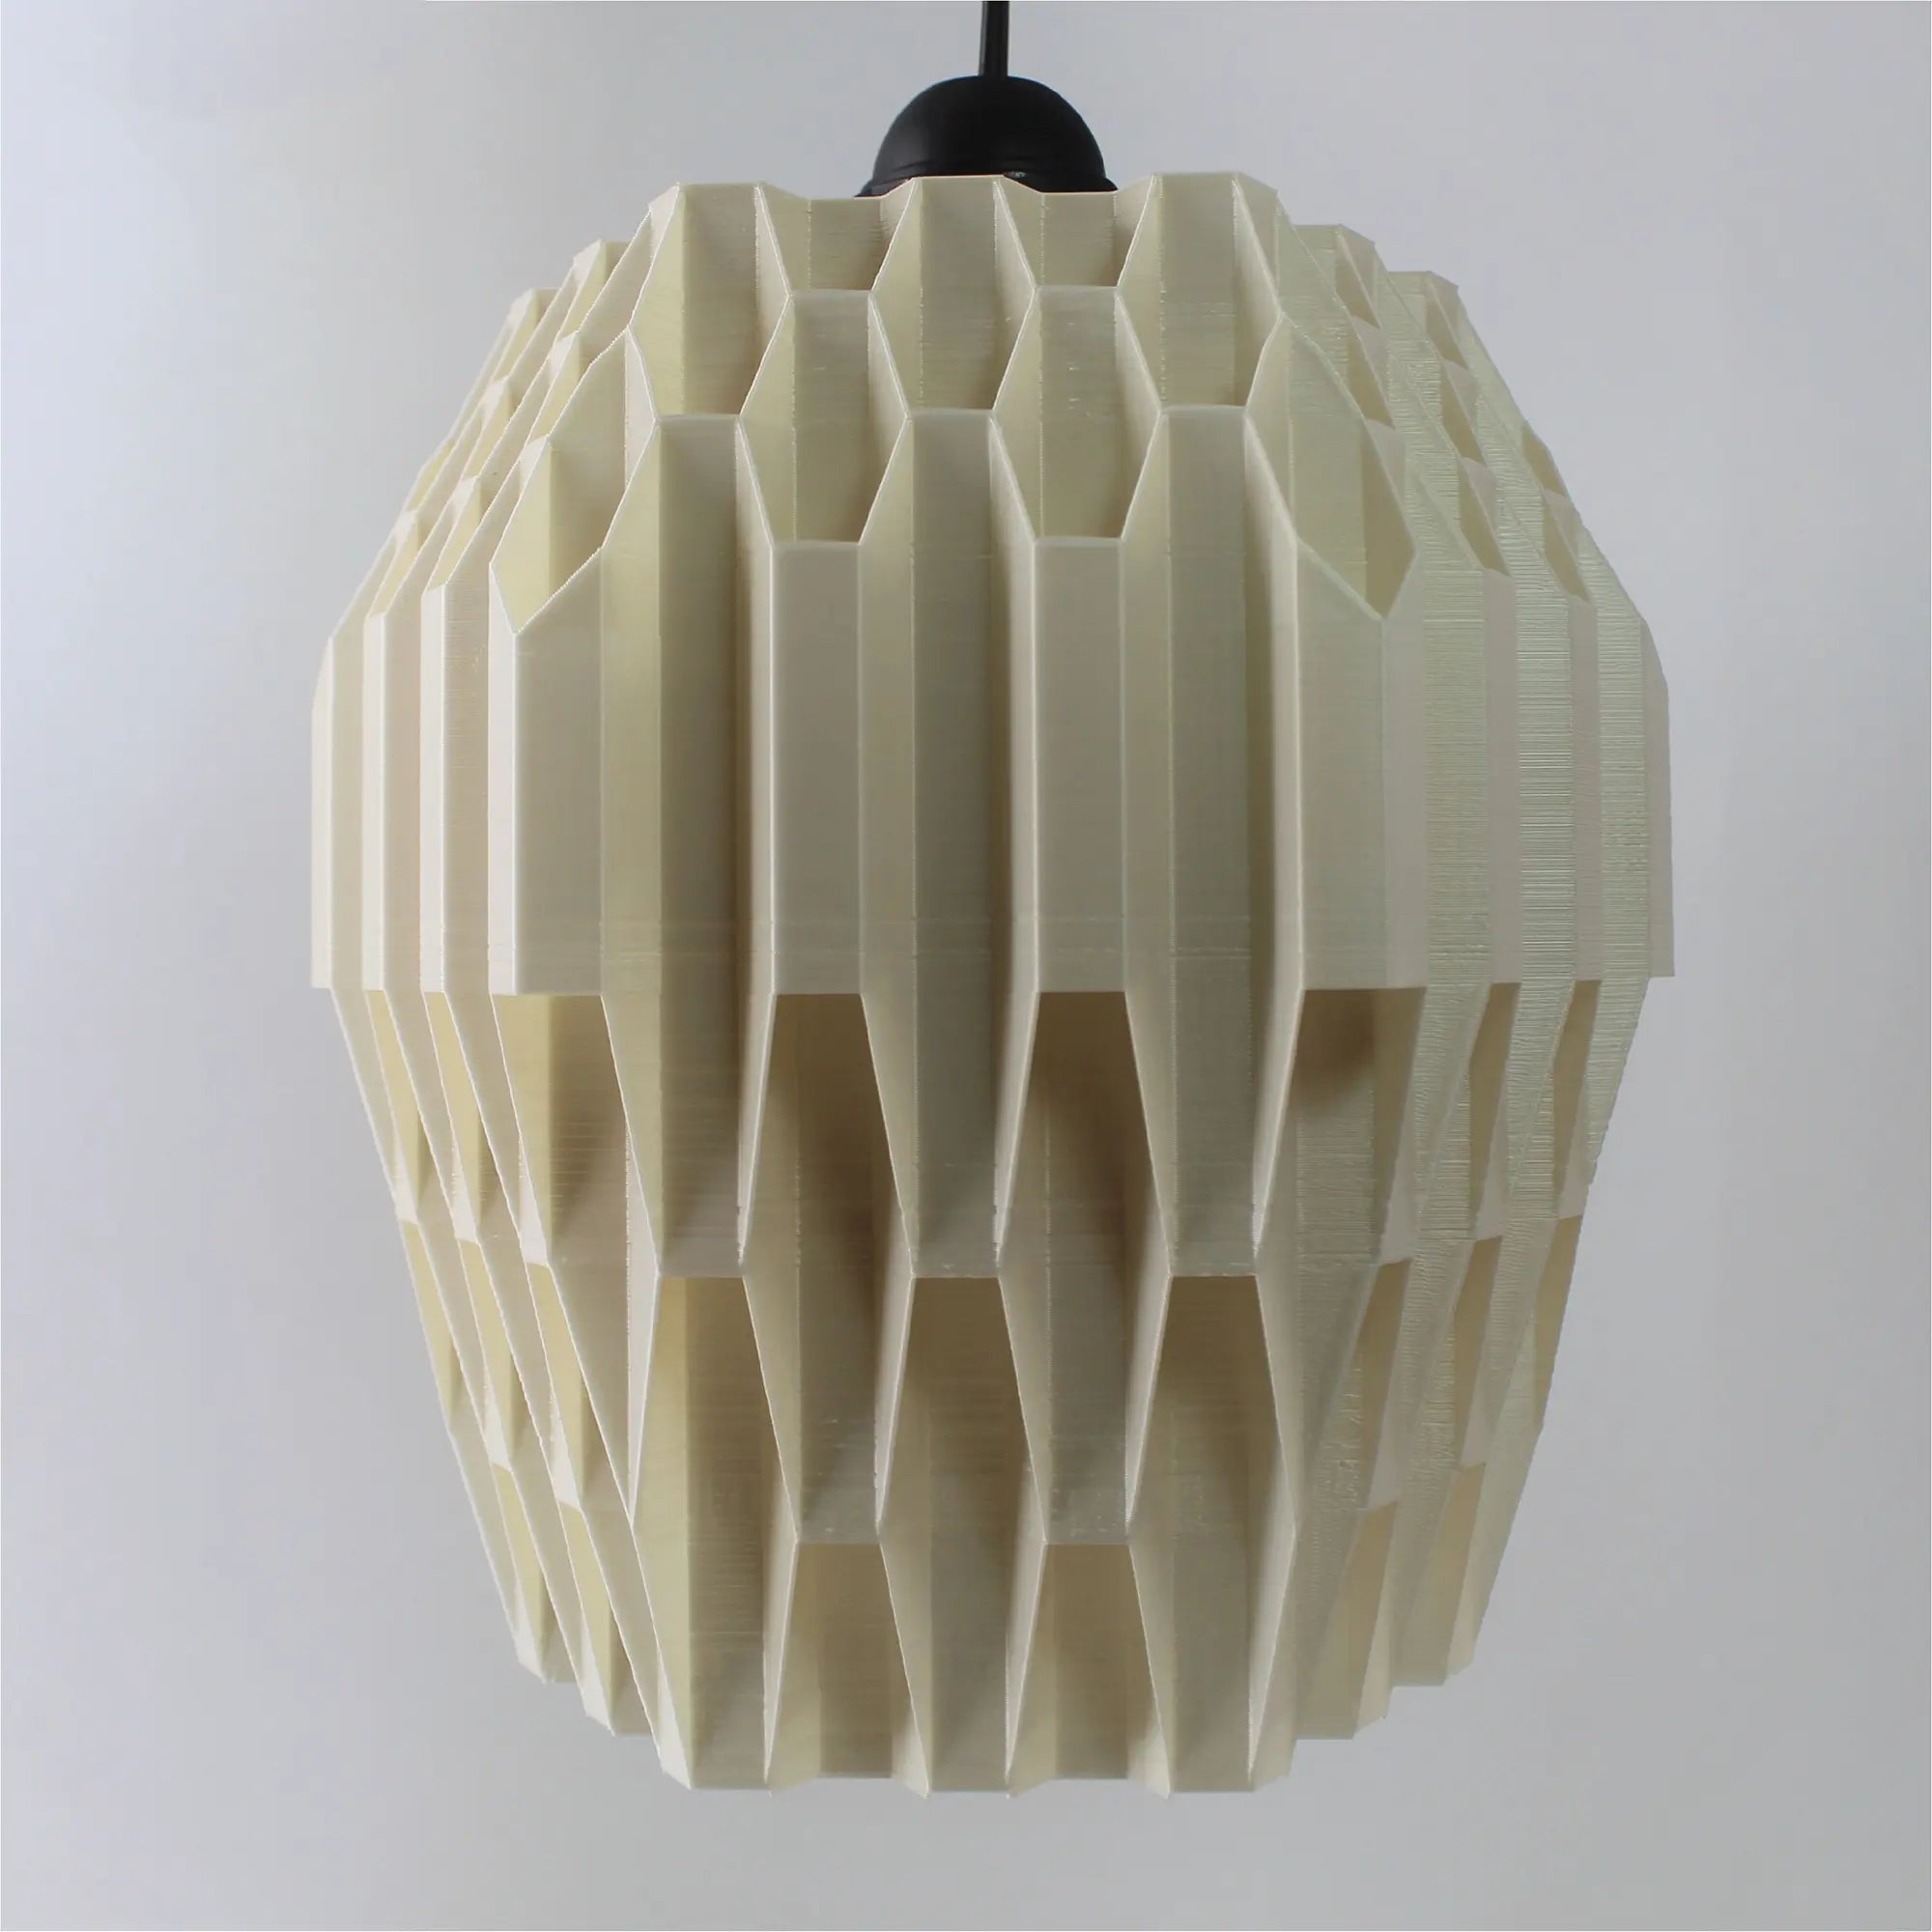 The Honeycomb Lampshade: Modern Ambient Glow